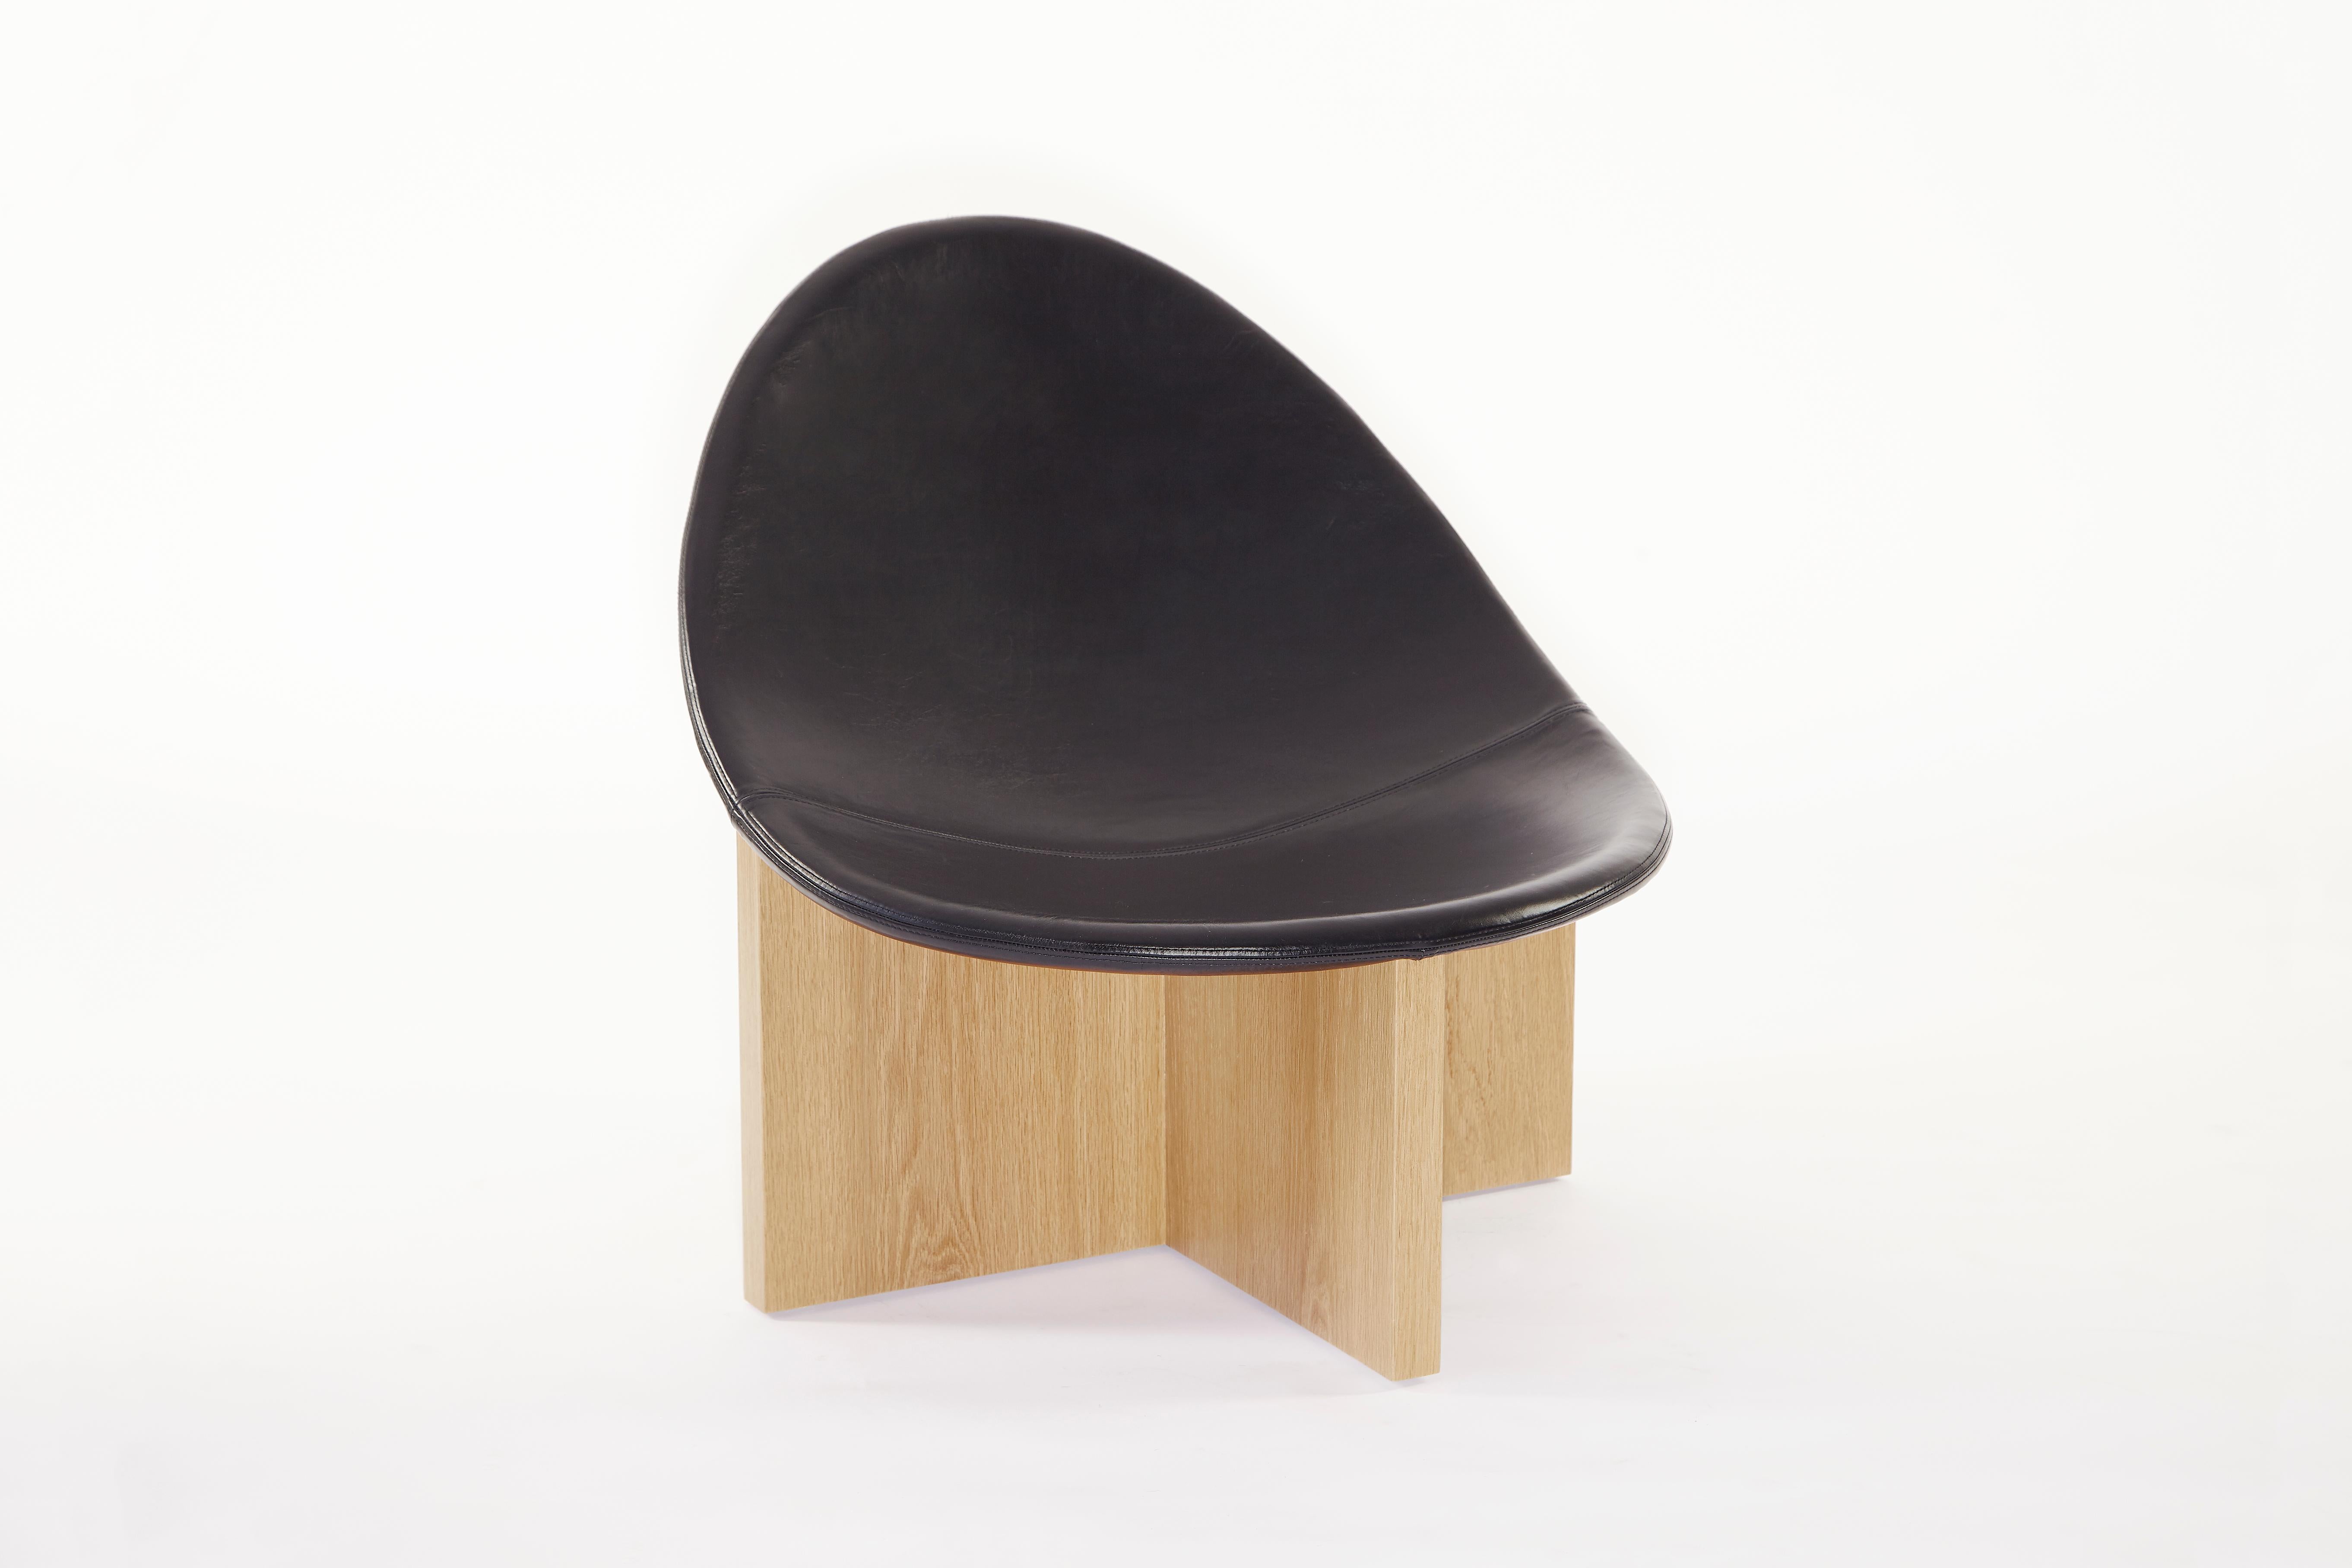 Nido black in oak lounge chair by Estudio Persona
Dimensions: W 76.2 x D 78.8 x H 76.2 cm
Materials: White oak, upholstered seat

Lounge chair made from a solid wood base with an upholstered seat.
Solid wood base options: White oak, maple,